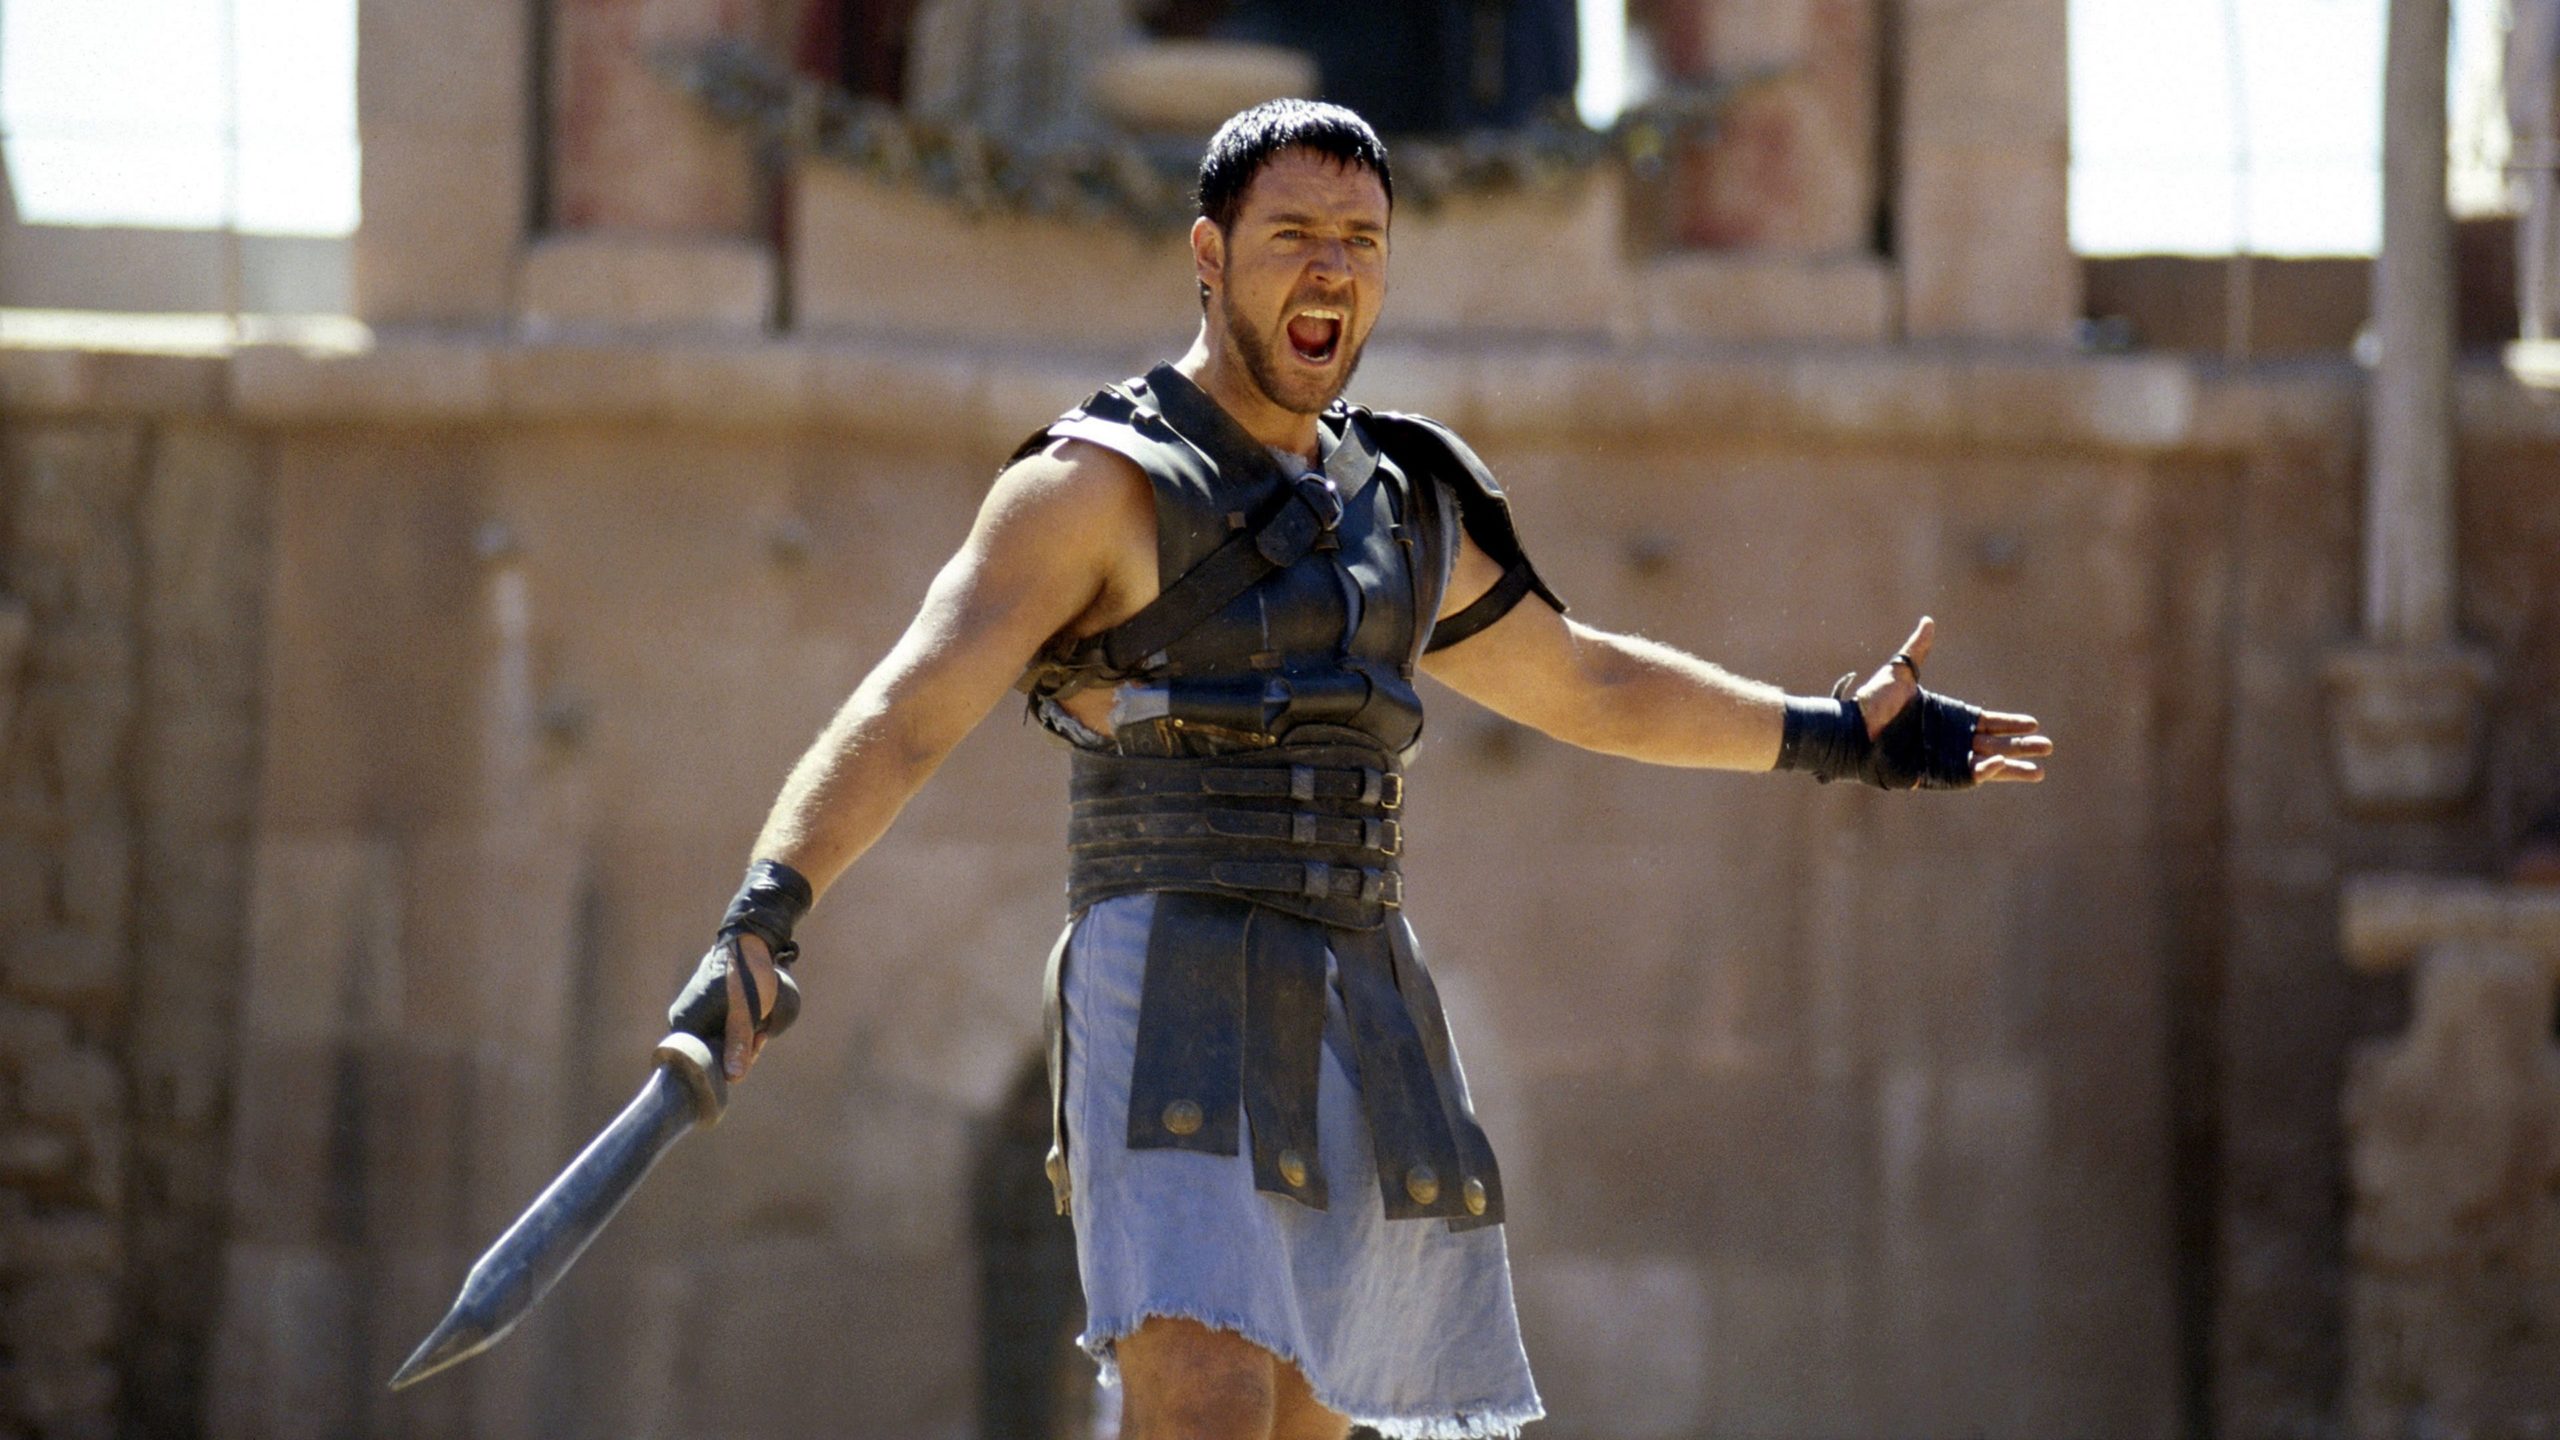 Gladiator 2 Release Date Confirmed by Paramount Pictures for